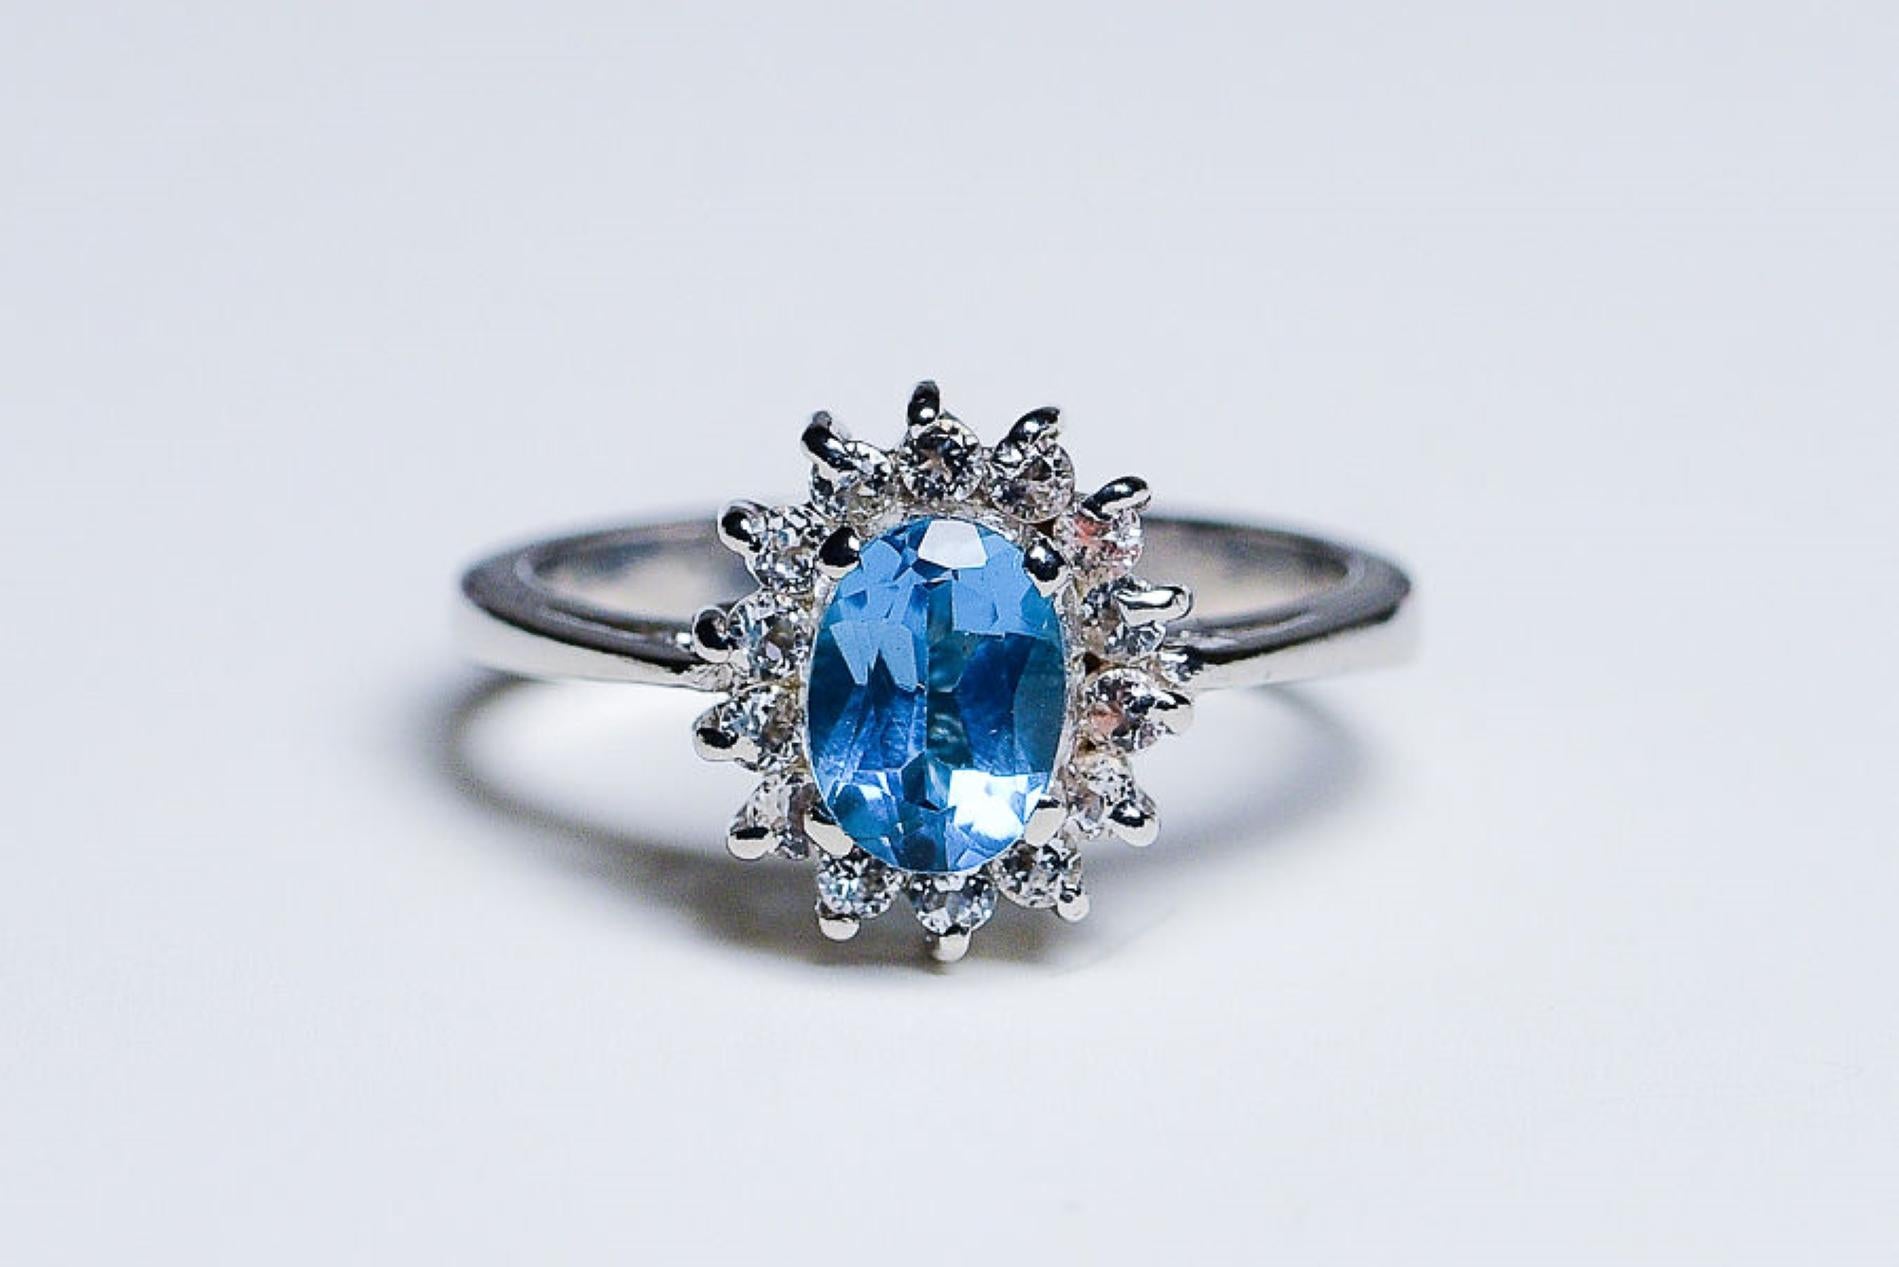 Presenting our 1.5ct Oval Topaz Silver Ring, a stunning piece that exudes elegance and sophistication. This ring features a mesmerizing 1.5ct Oval Topaz at its center, known for its captivating blue hue and exceptional clarity.

The Topaz is